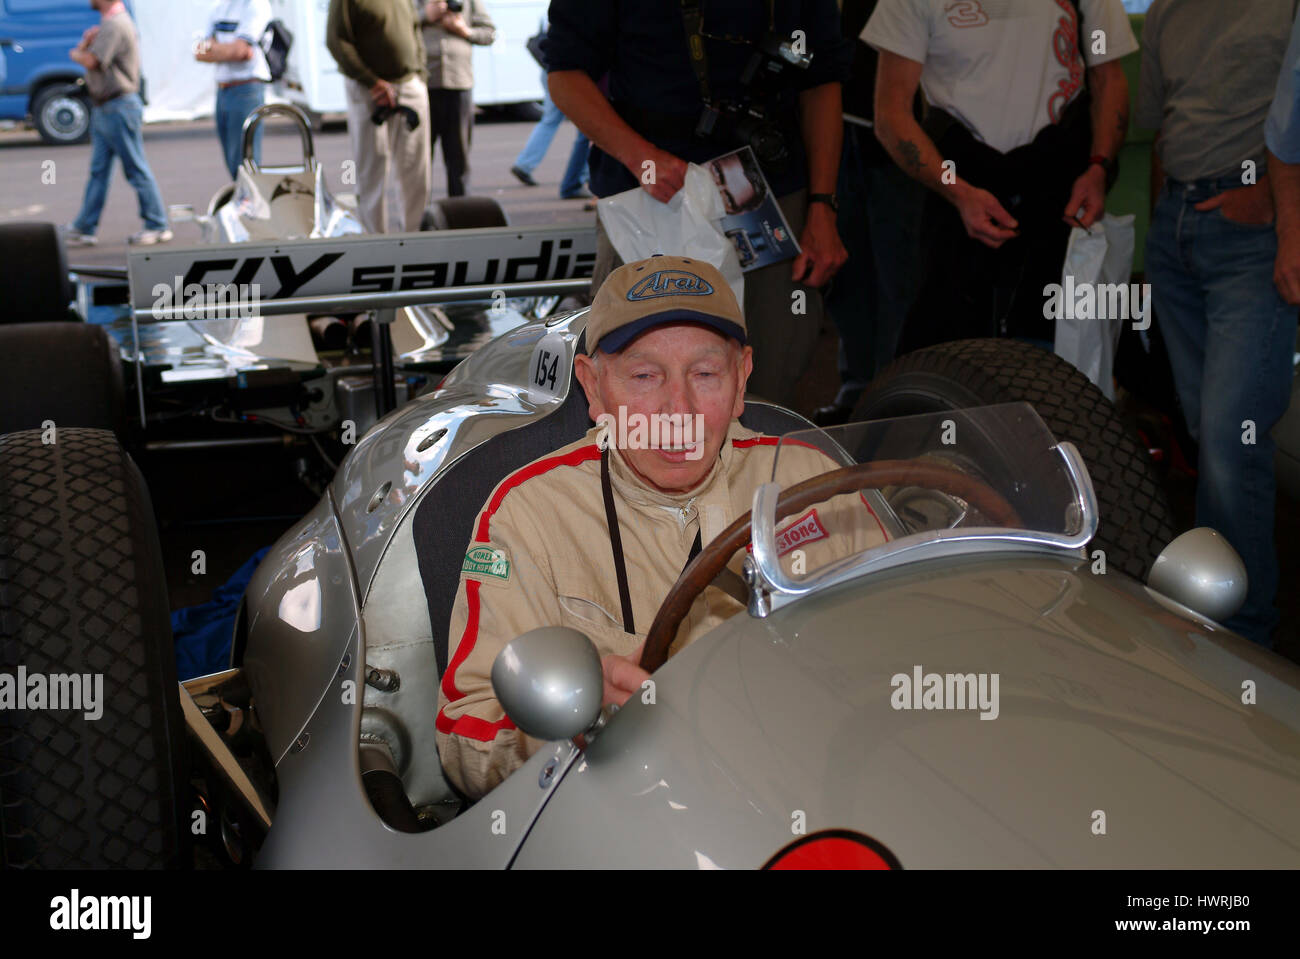 John Surtees, Festival of speed, Goodwood, UK  2004. Grand Prix motorcycle road racer and Formula One driver. February 1934 – 10 March 2017 Stock Photo